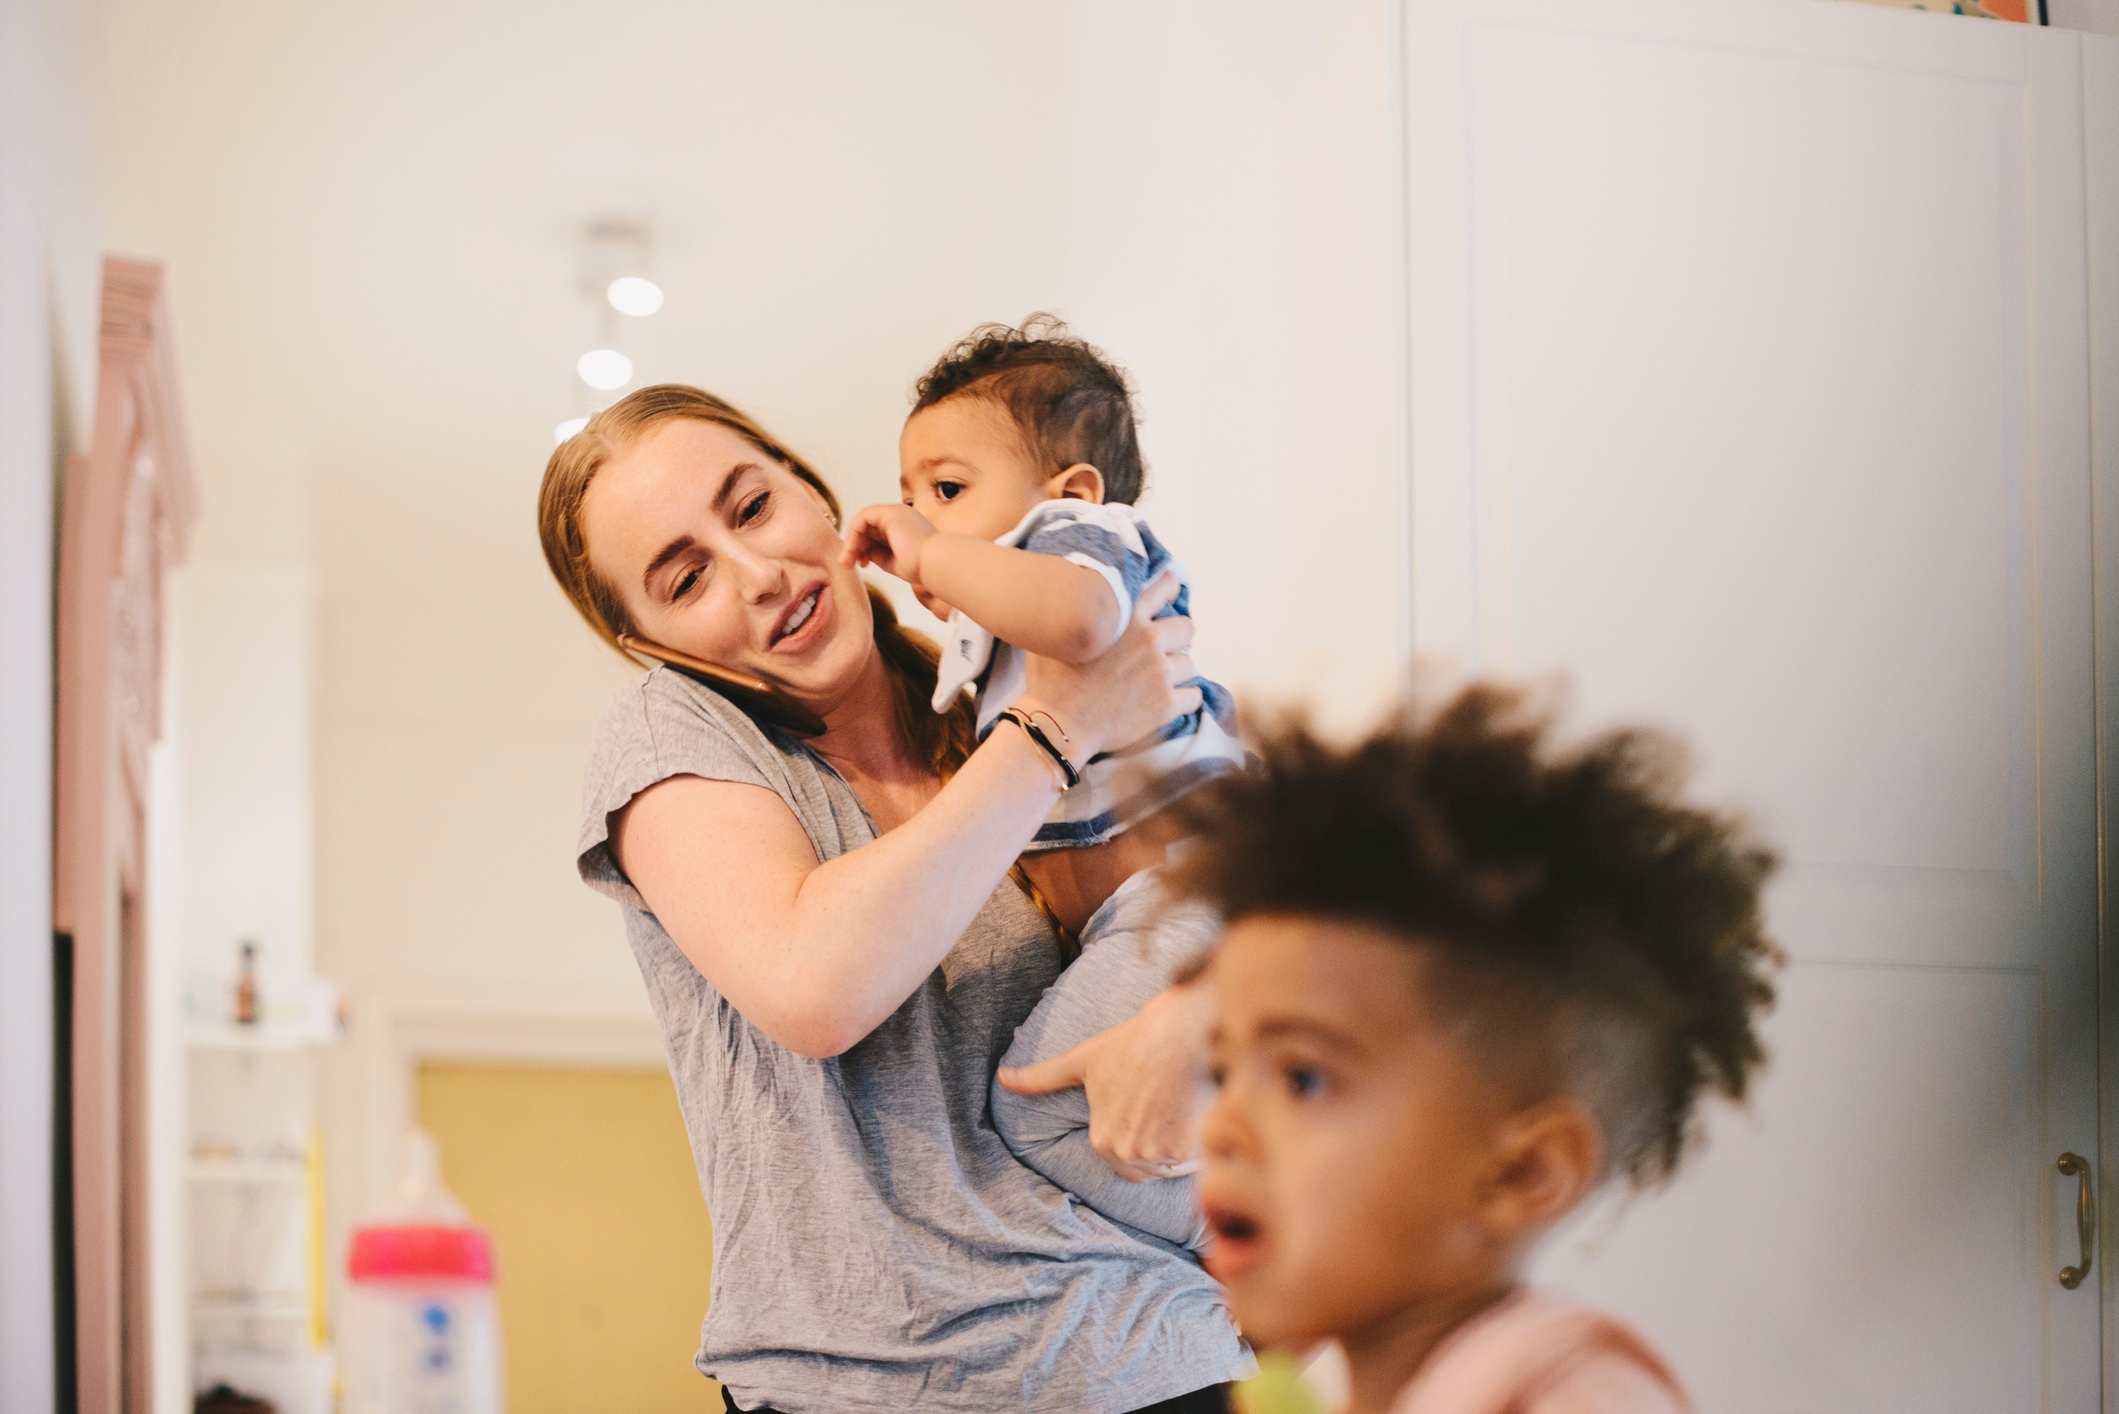 What to say when parents make your child care job more difficult